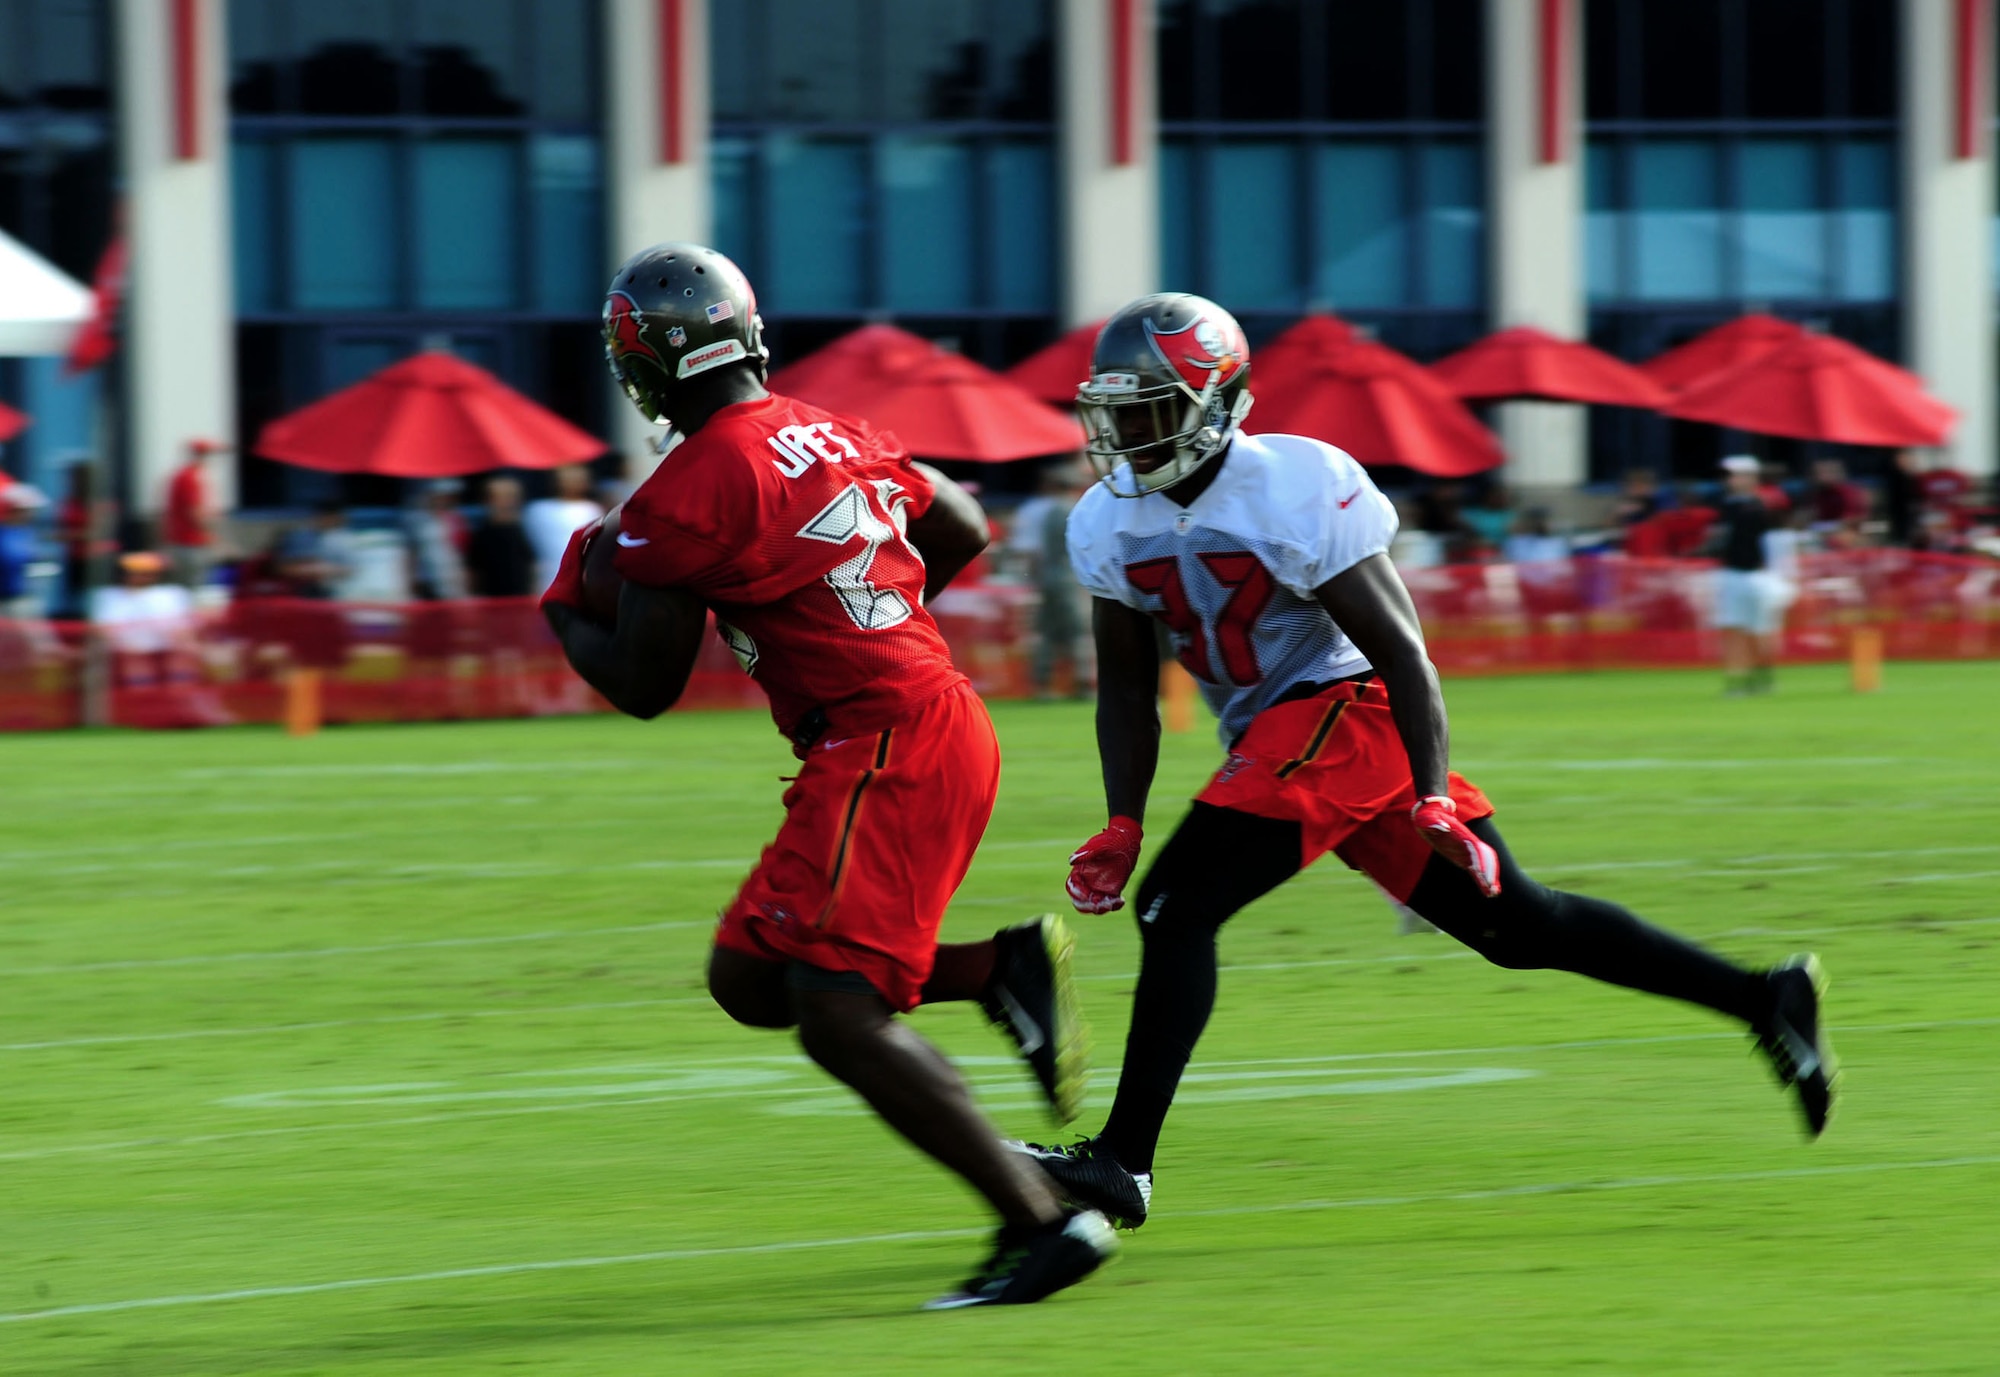 Keith Tandy, right, a safety with the Tampa Bay Buccaneers, tries to prevent Mike James, left, a wide receiver with the Tampa Bay Buccaneers from scoring as part of a drill during a training camp at Raymond James Stadium in Tampa, Fla, July 29, 2016. As the second line of defense the safety’s job is to stop any player that makes it past the defensive line and linebackers. (U.S Air Force photo by Airman 1st Class Rito Smith) 